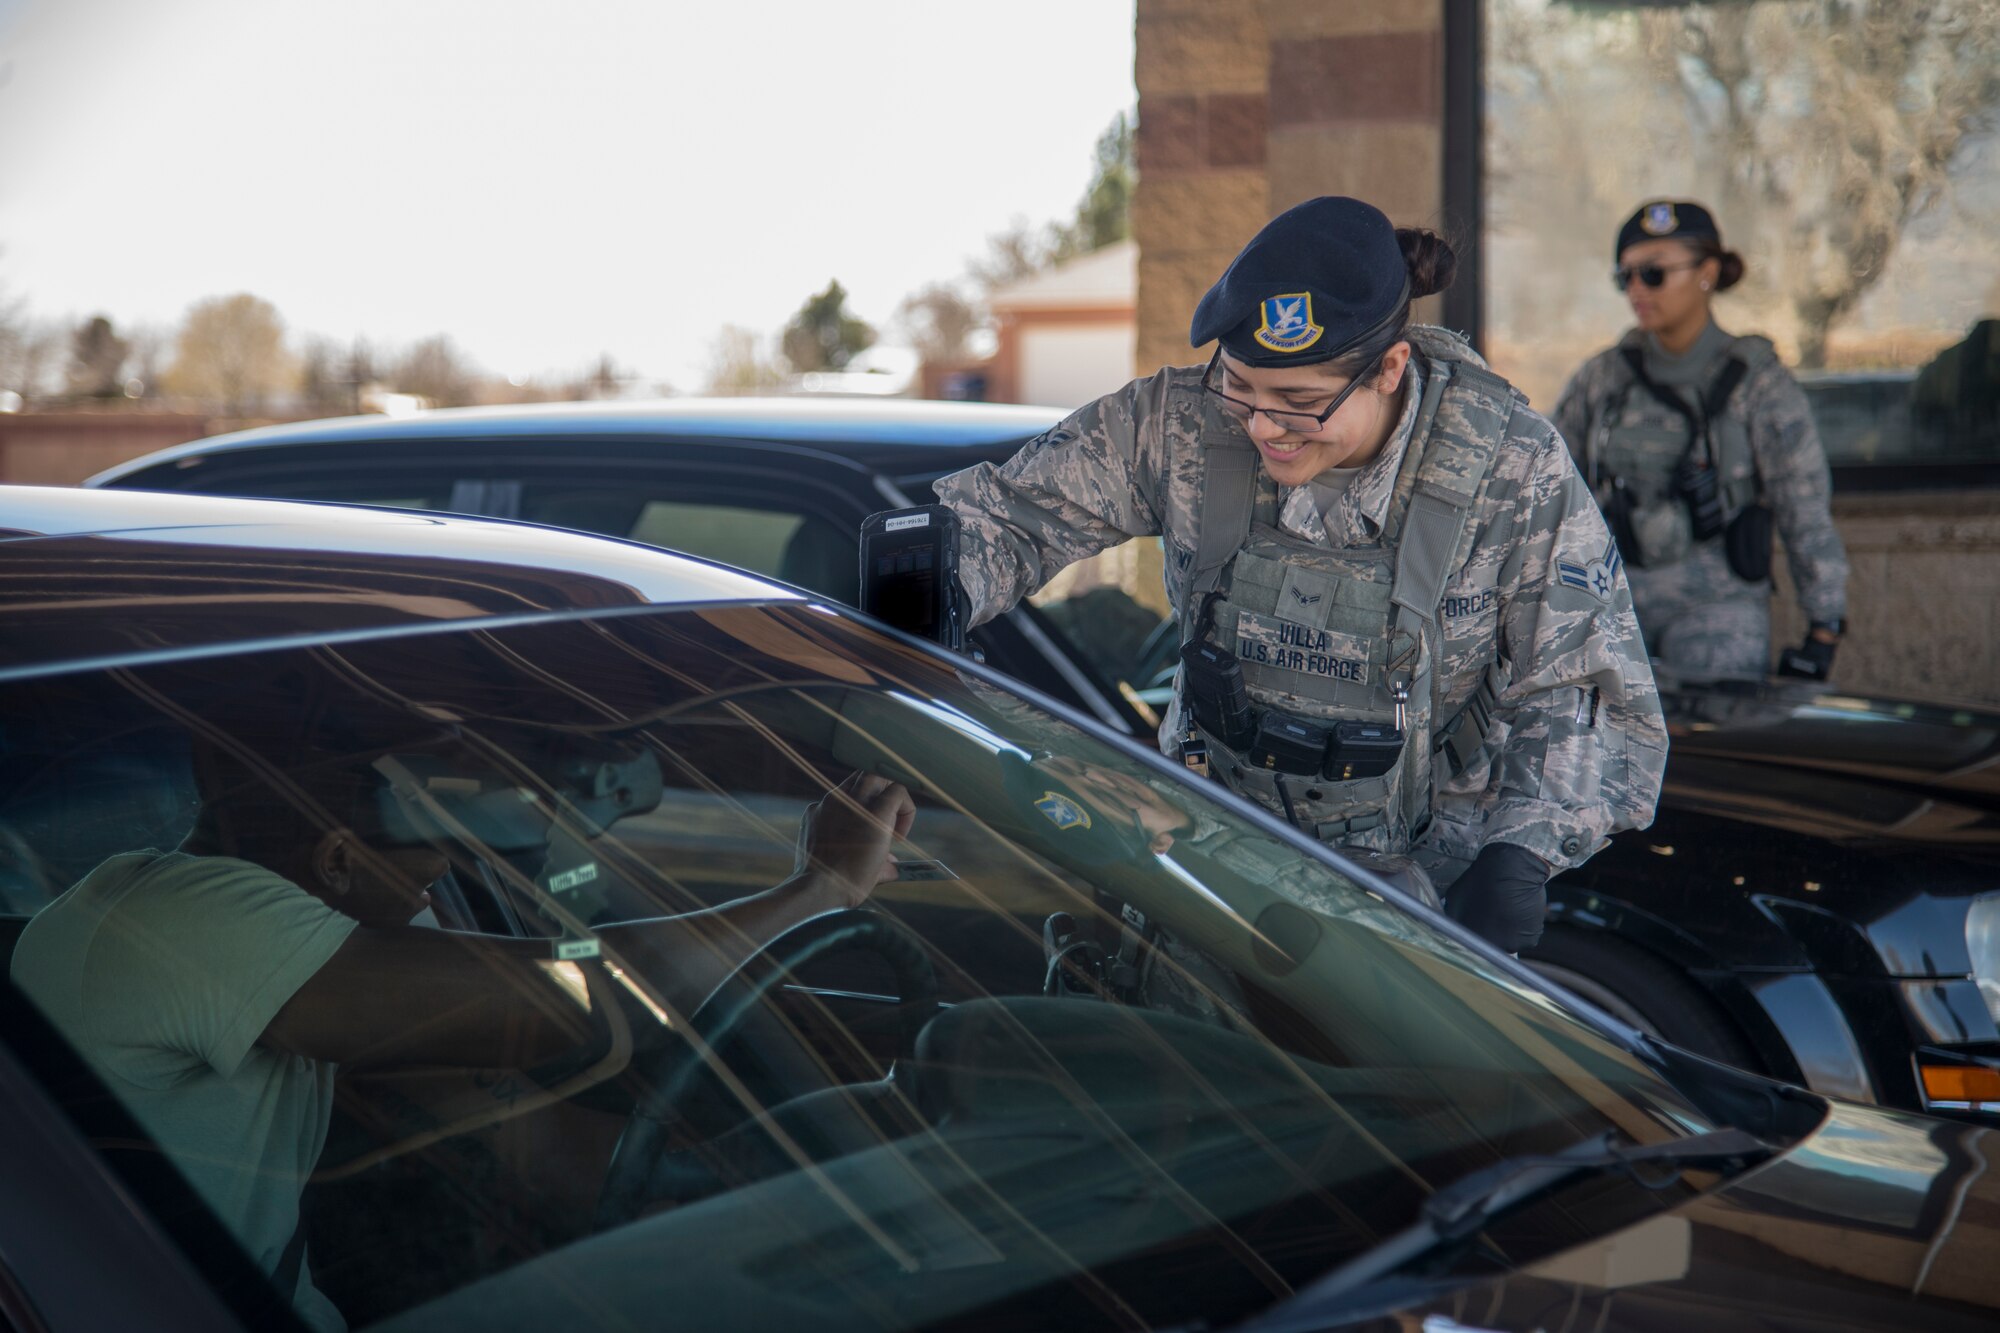 Airman 1st Class Chelsea Villa, 49th Security Force Squadron installation entry controller, scans an ID at the main gate of Holloman Air Force Base, N.M., March 20, 2020. Security forces members are following additional procedures and protocols in an effort to prevent the spread of COVID-19. (U.S. Air Force photo by Senior Airman Collette Brooks)